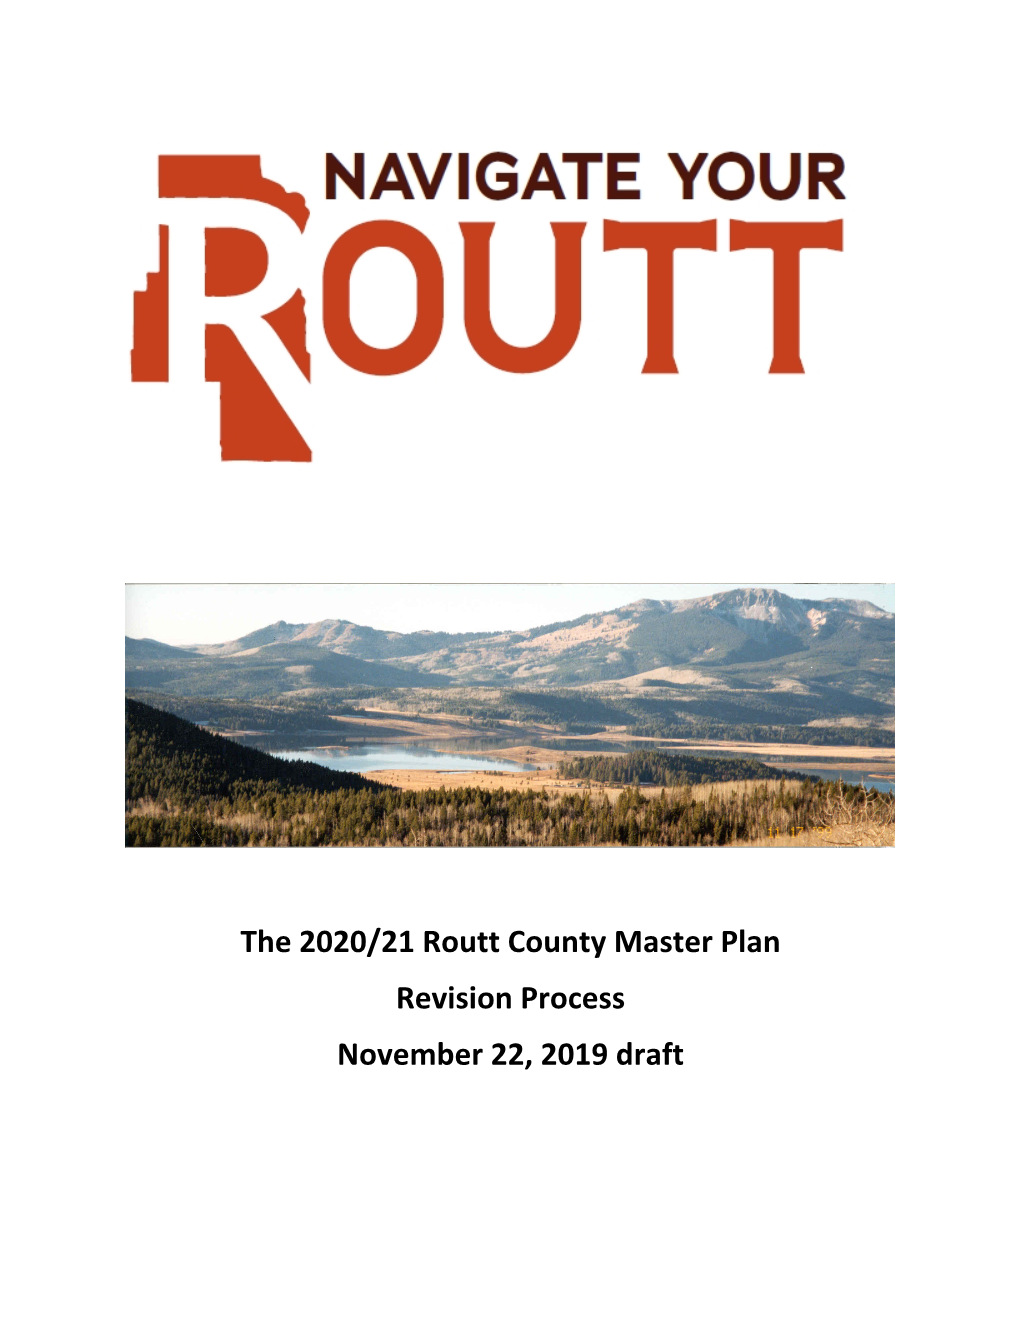 The 2020/21 Routt County Master Plan Revision Process November 22, 2019 Draft CONTENTS PROJECT TIMELINE